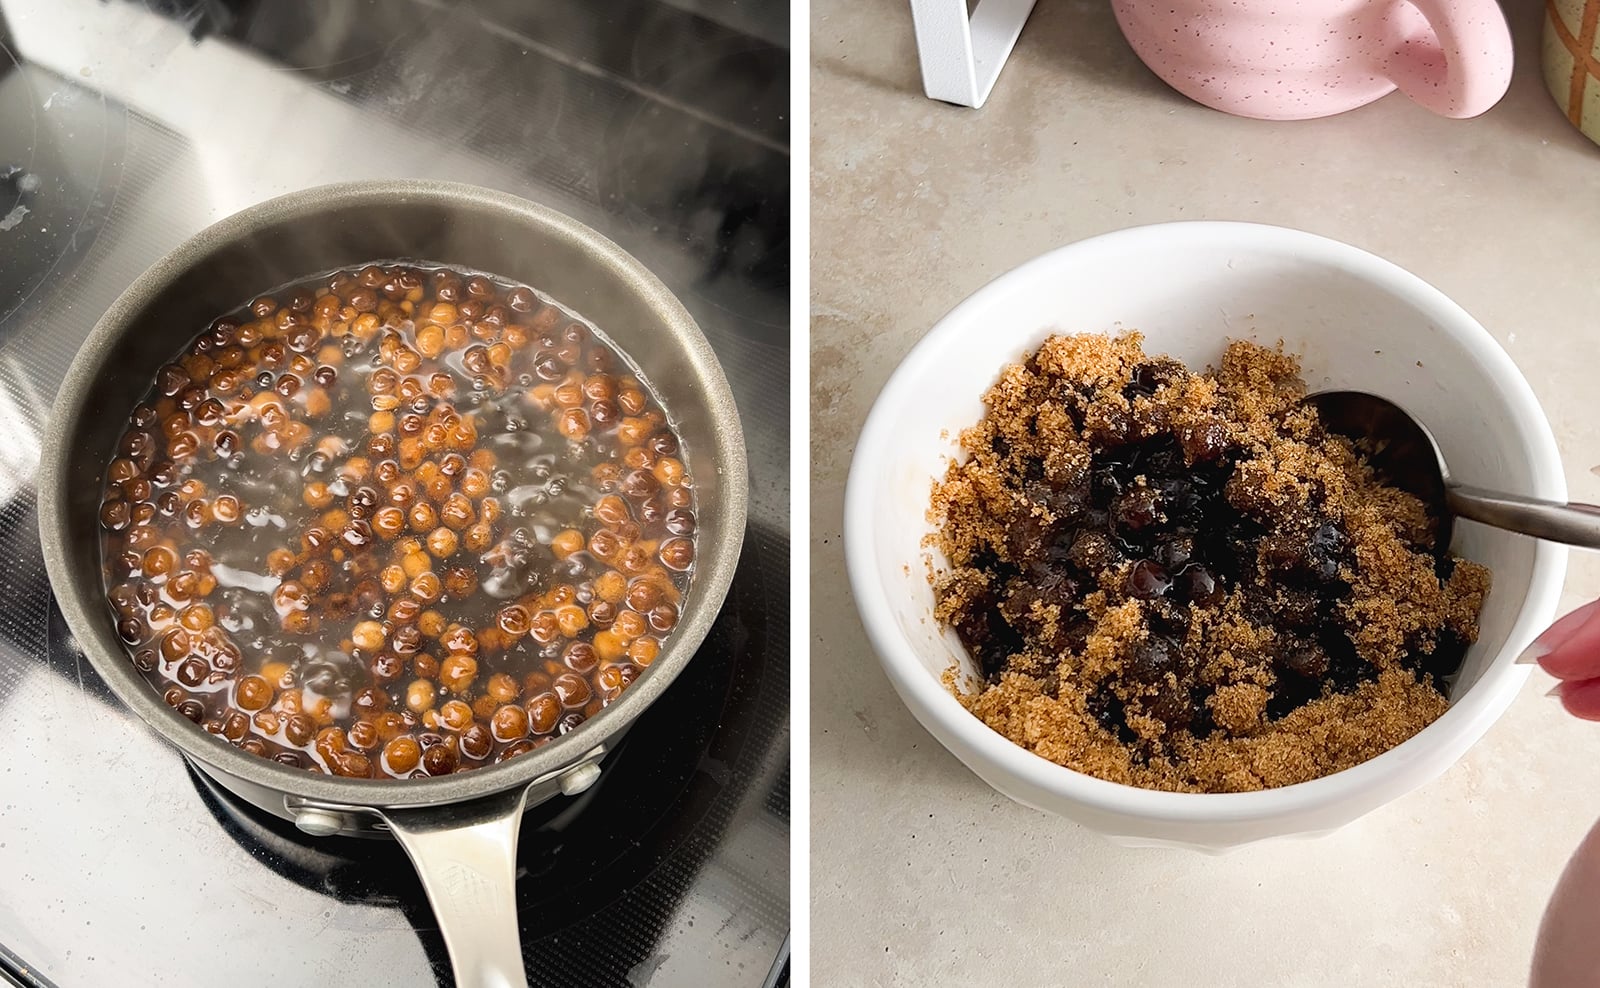 Left to right: tapioca pearls cooking in a pot of water, mixing tapioca pearls with brown sugar in a bowl.